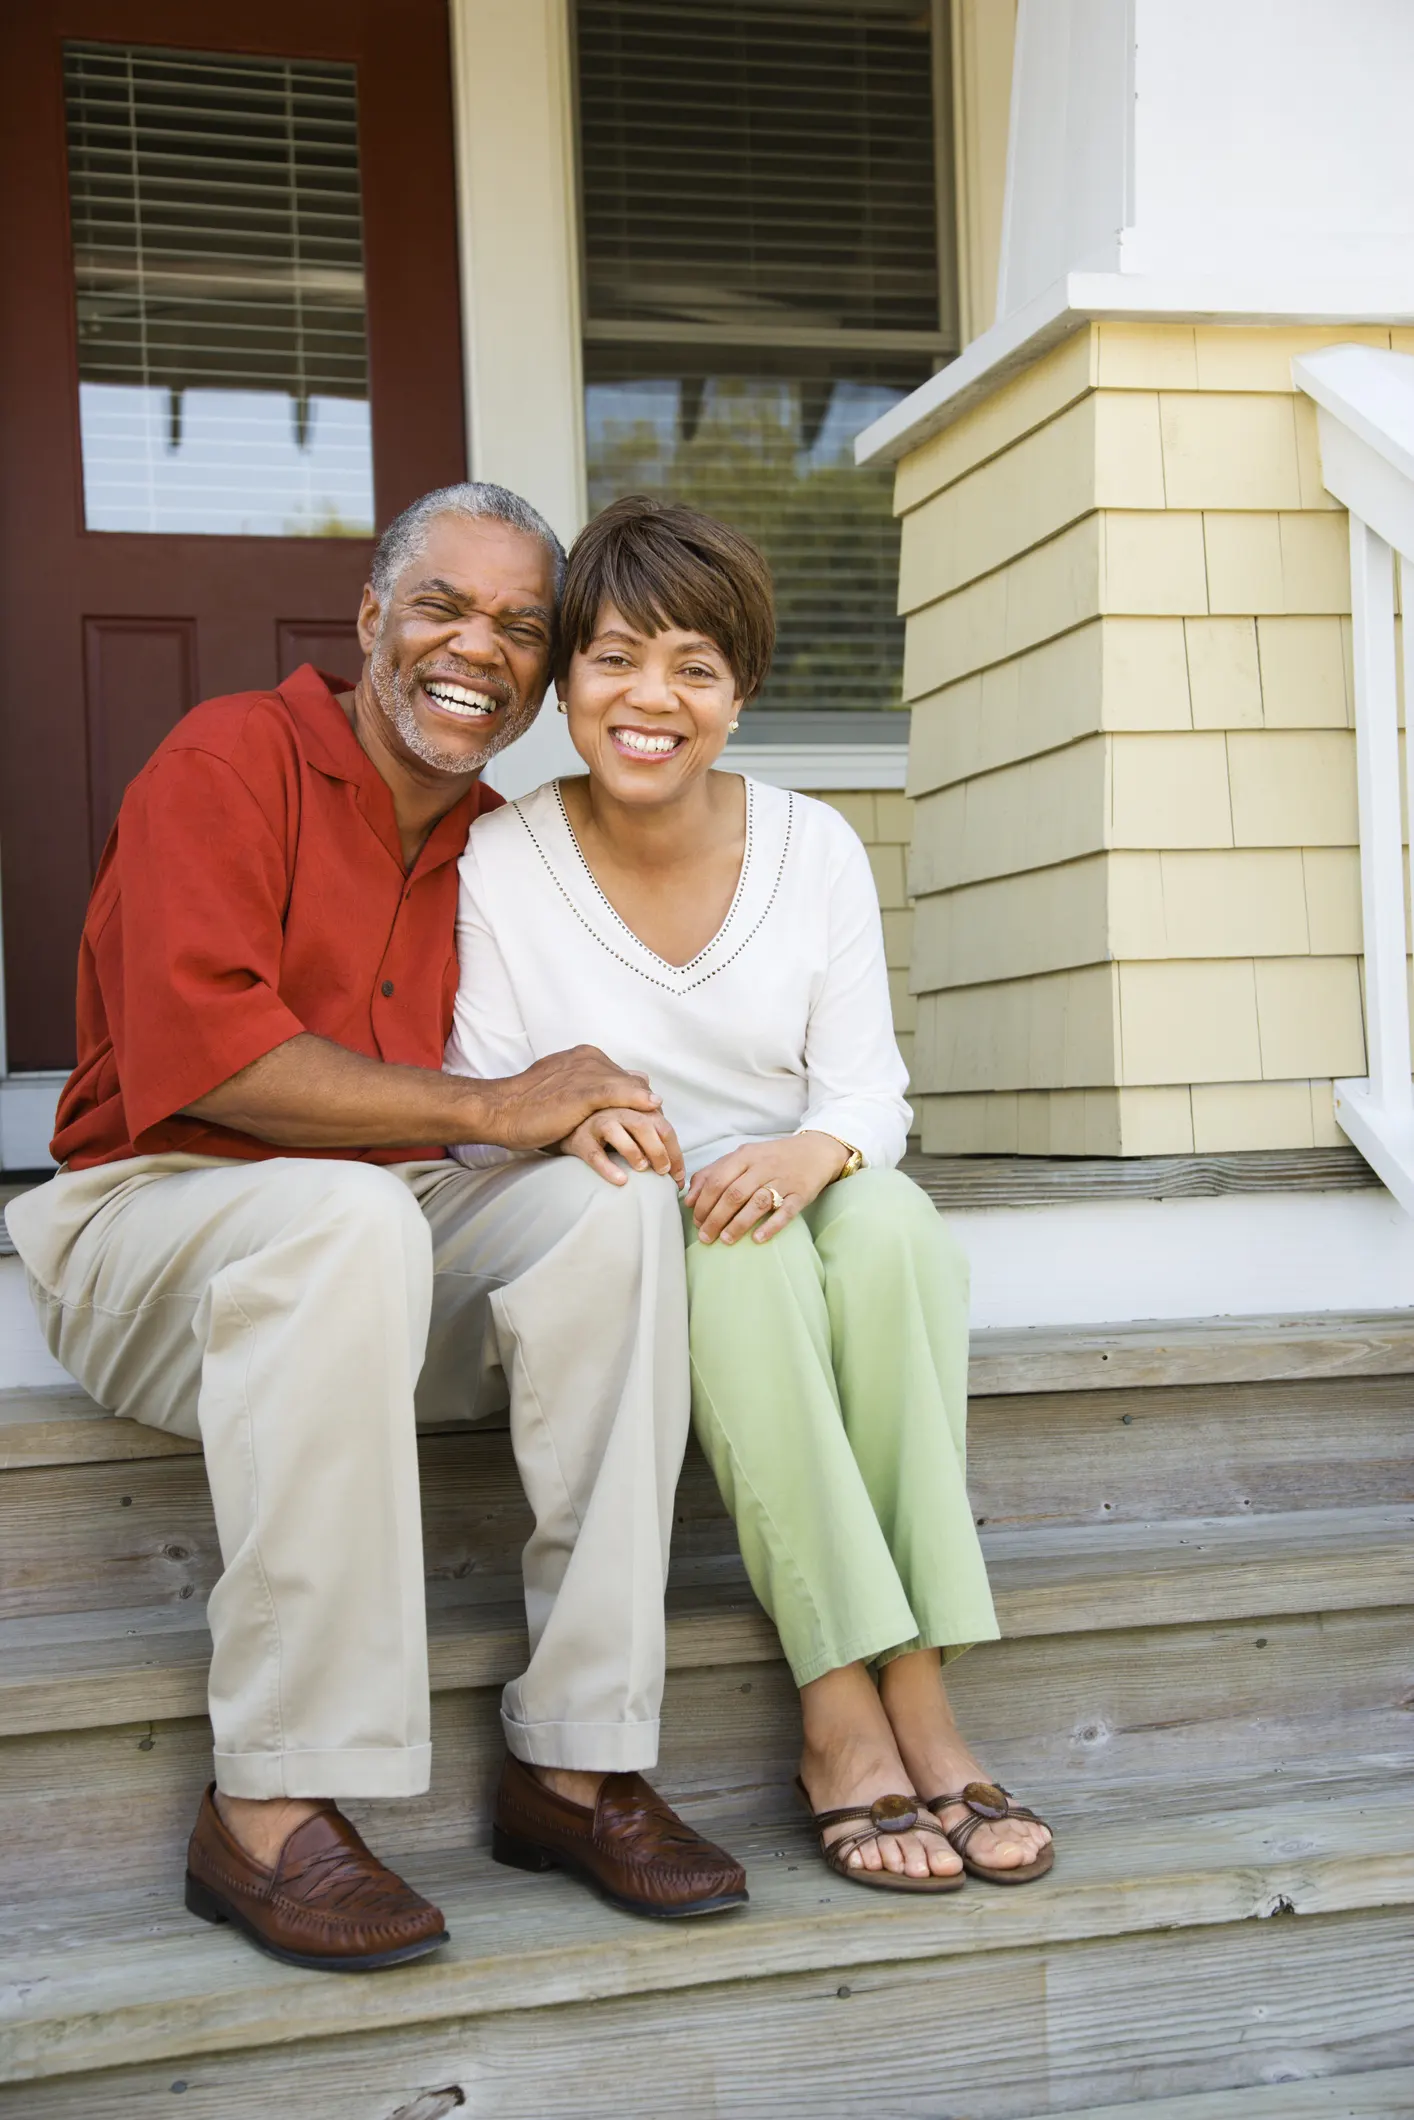 Diversify your investment portfolio by investing in retirement communities